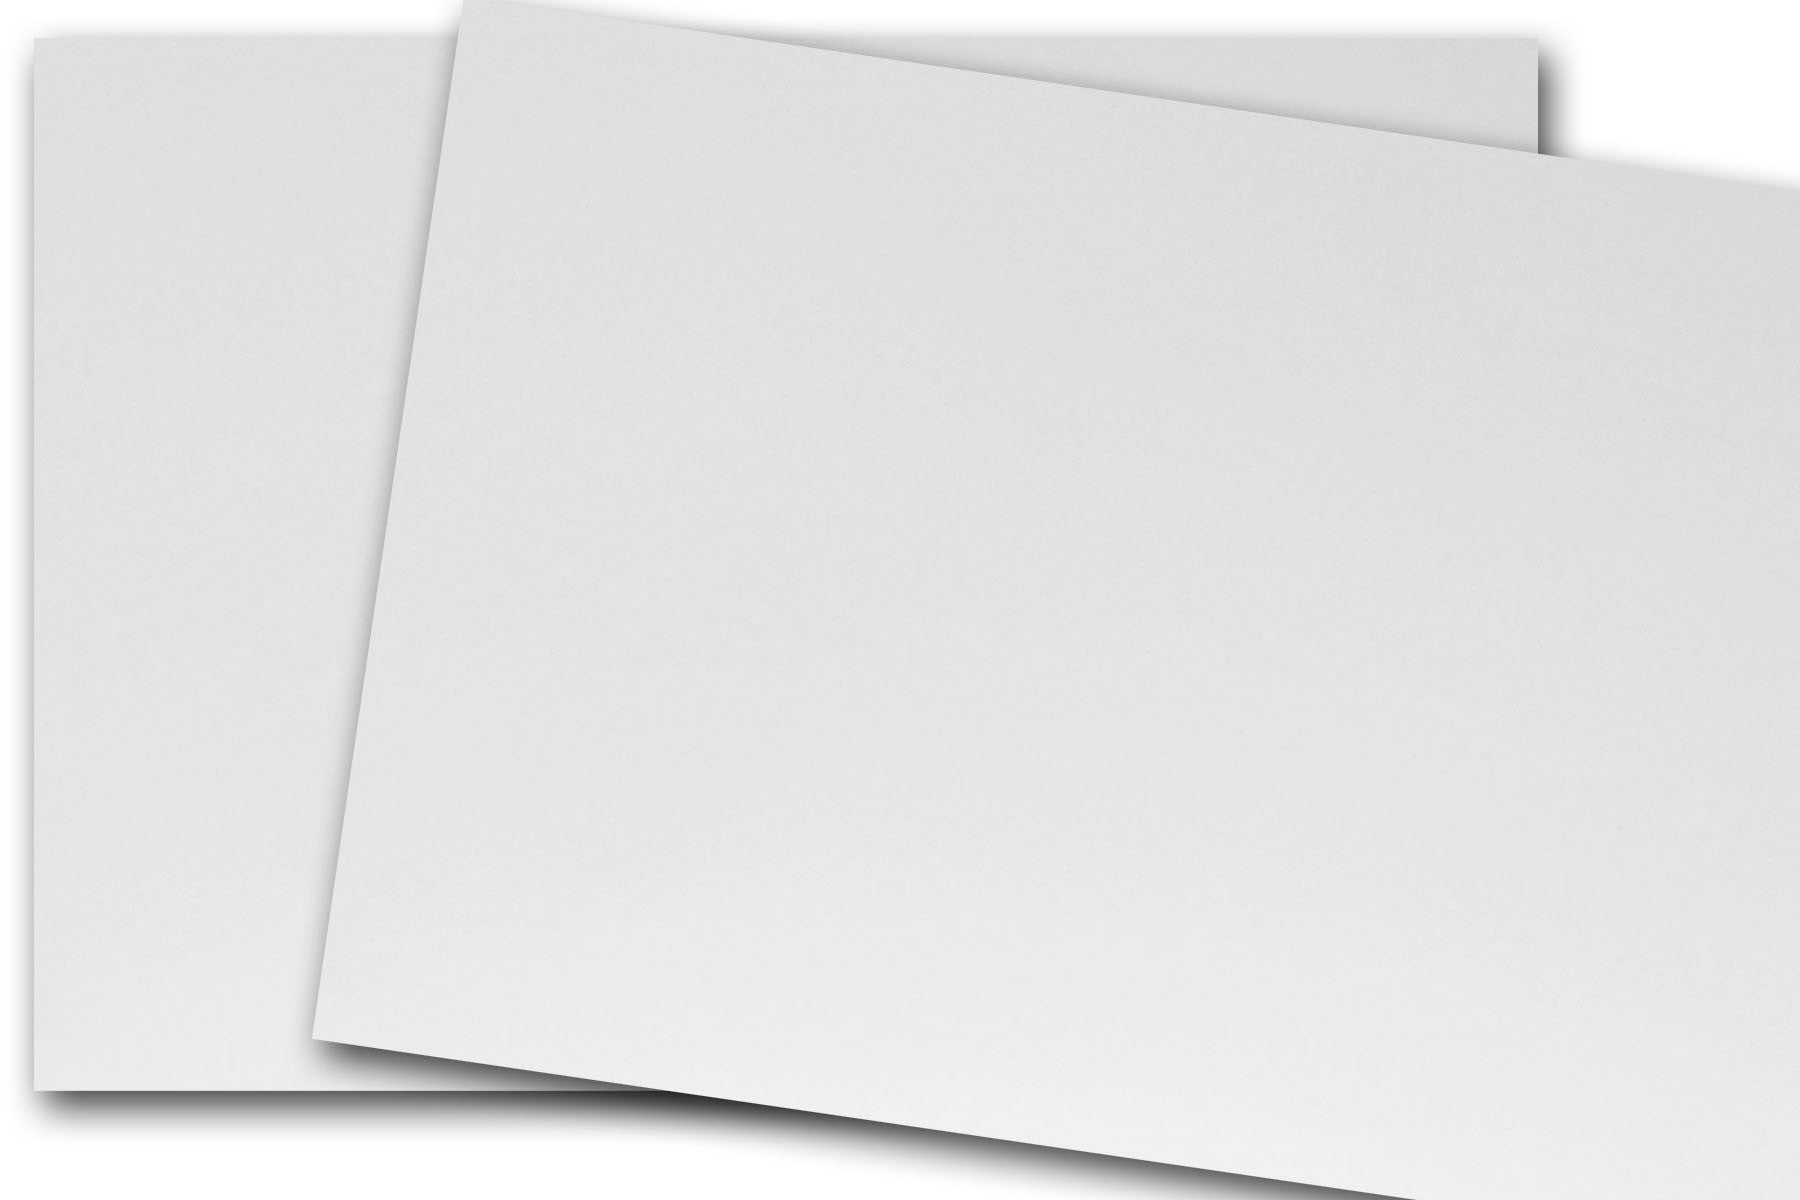 Quill Brand® 110 lb. Card Stock Paper, 8.5 x 11, White, 250